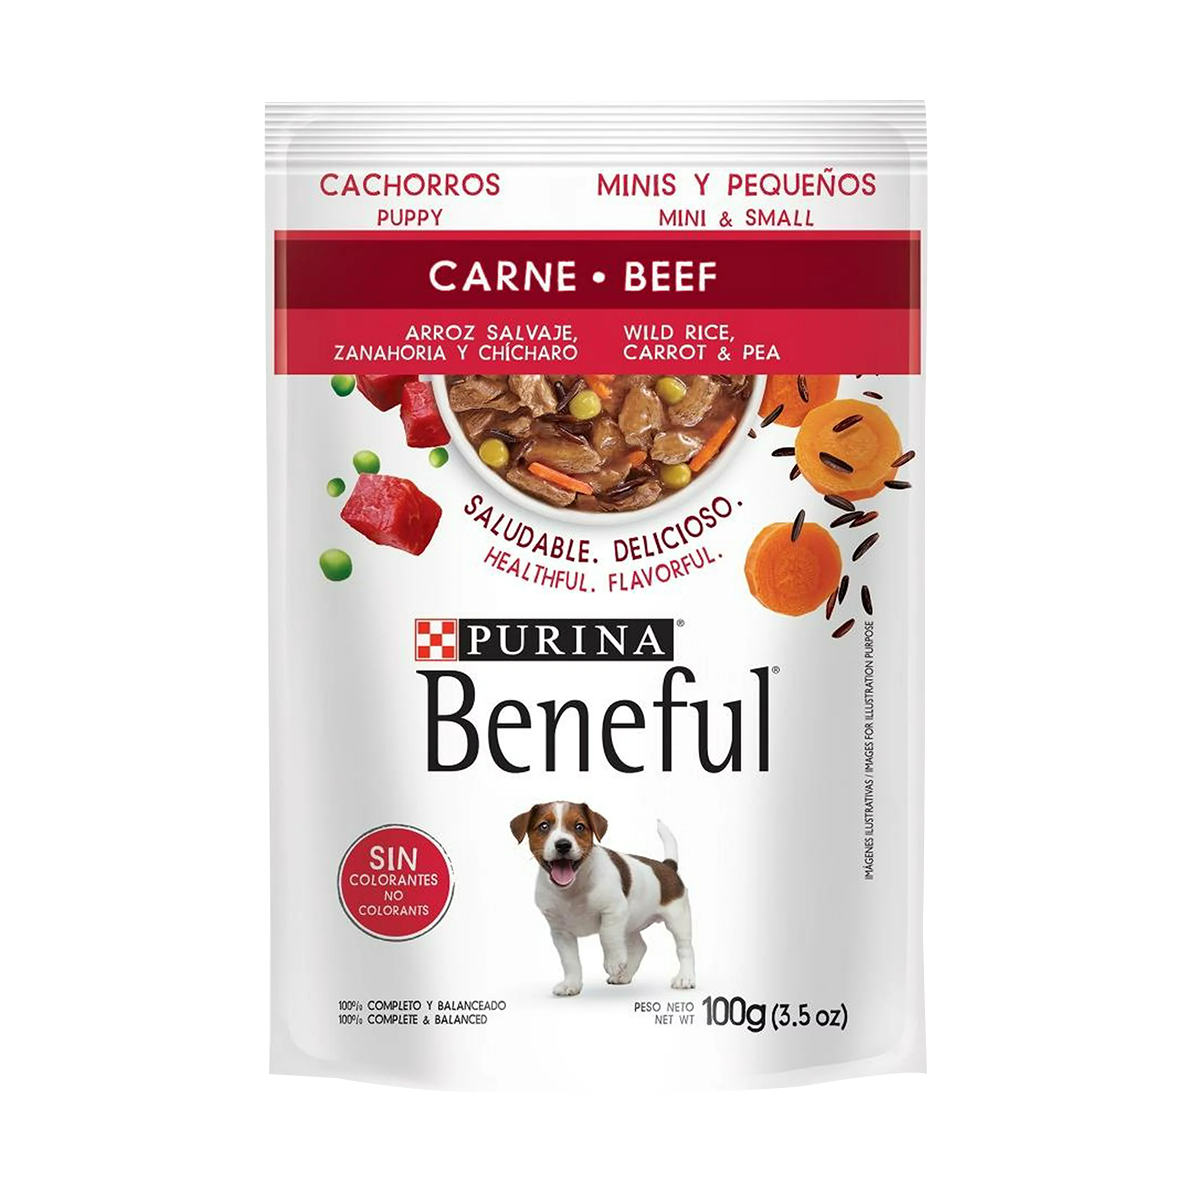 PurinaLatam_Beneful_Cachorros_Carne-FRONT.png